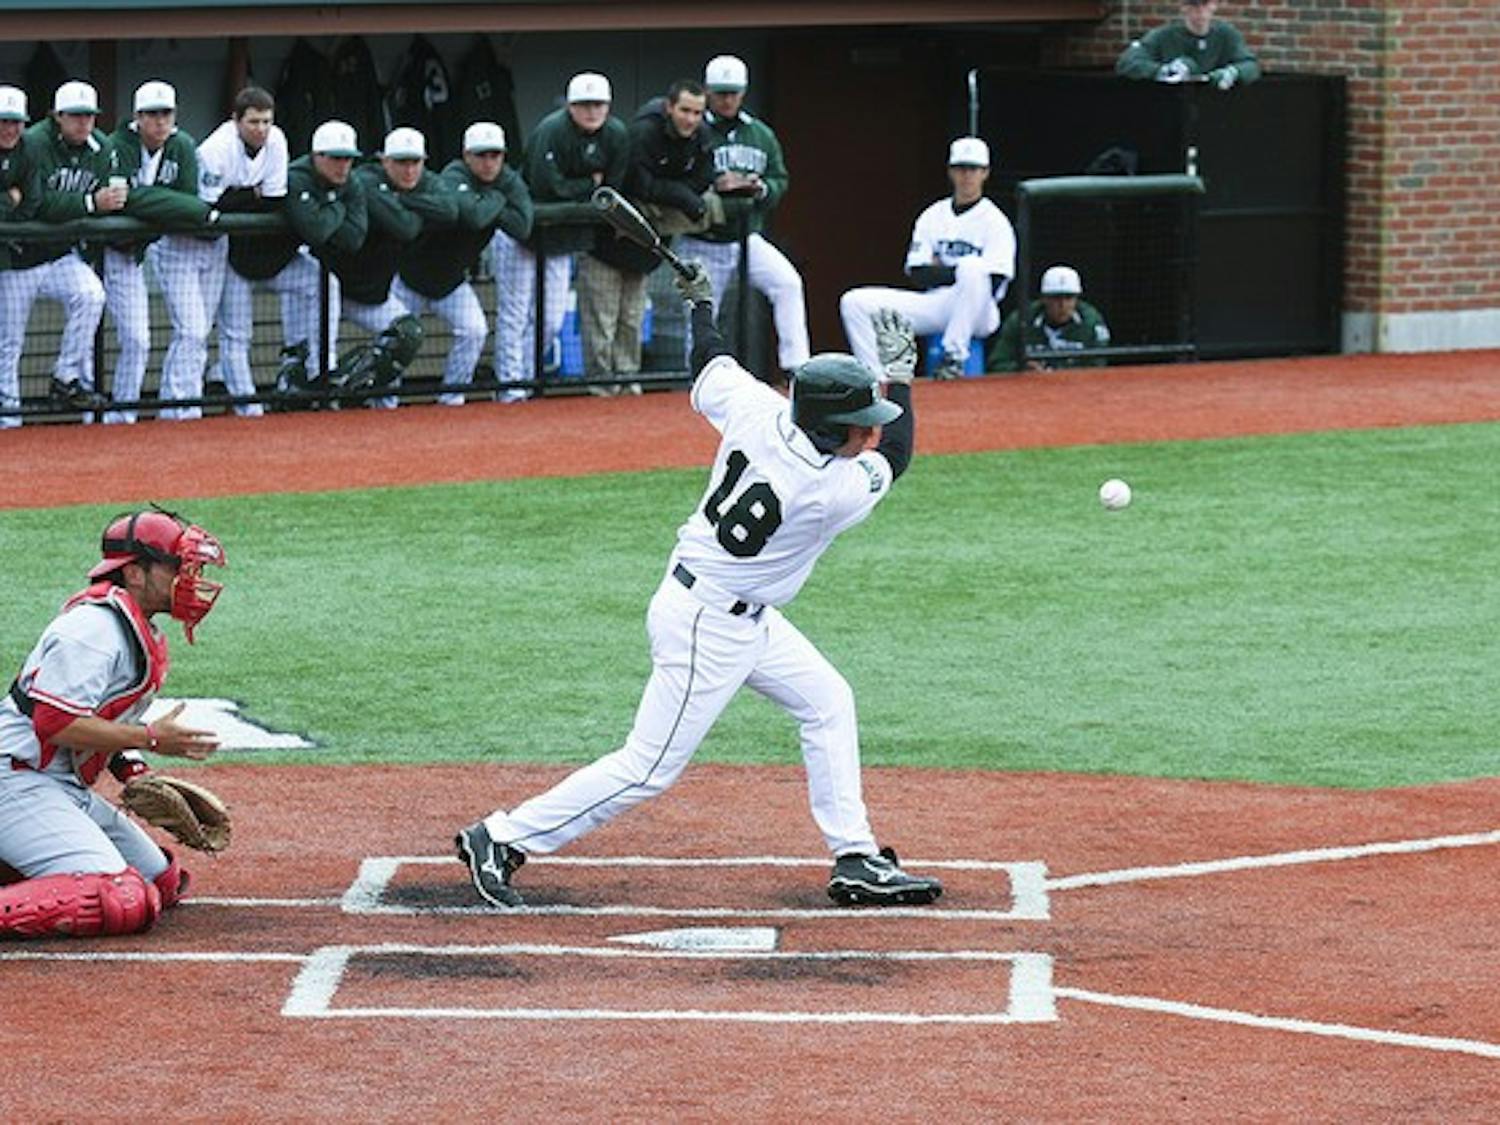 The Dartmouth baseball team will take on Cornell University in the Ivy Championship Series this weekend in Ithaca, N.Y.